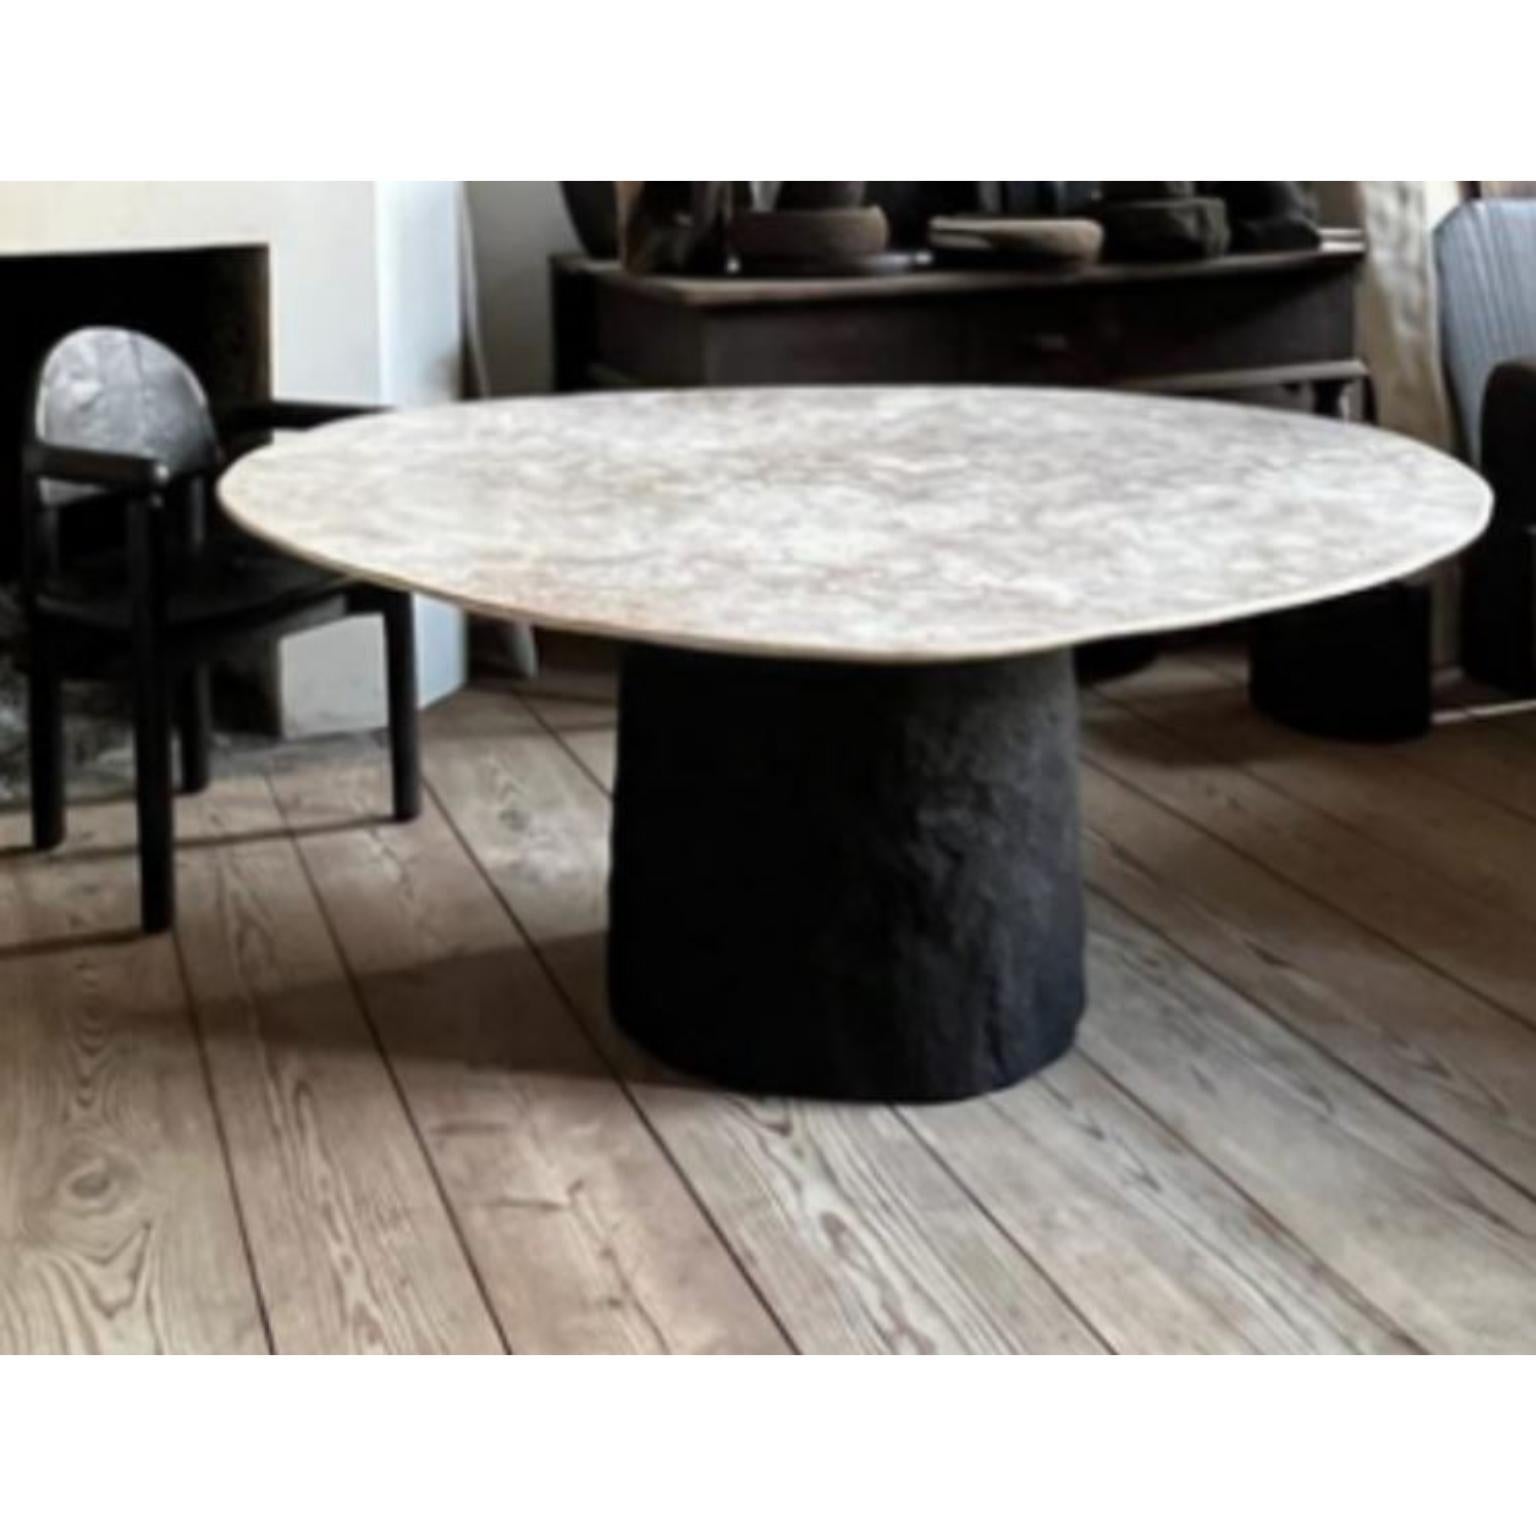 Beach Rock Dining Table by Atelier Benoit Viaene
Dimensions: D 160 x H 76 cm.
Materials: Wood, Beach Rock.

Benoit Viaene is originally from Kortrijk and now works and lives in Ghent.
He is a graduated Architect of the Henry Van de Velde Institute